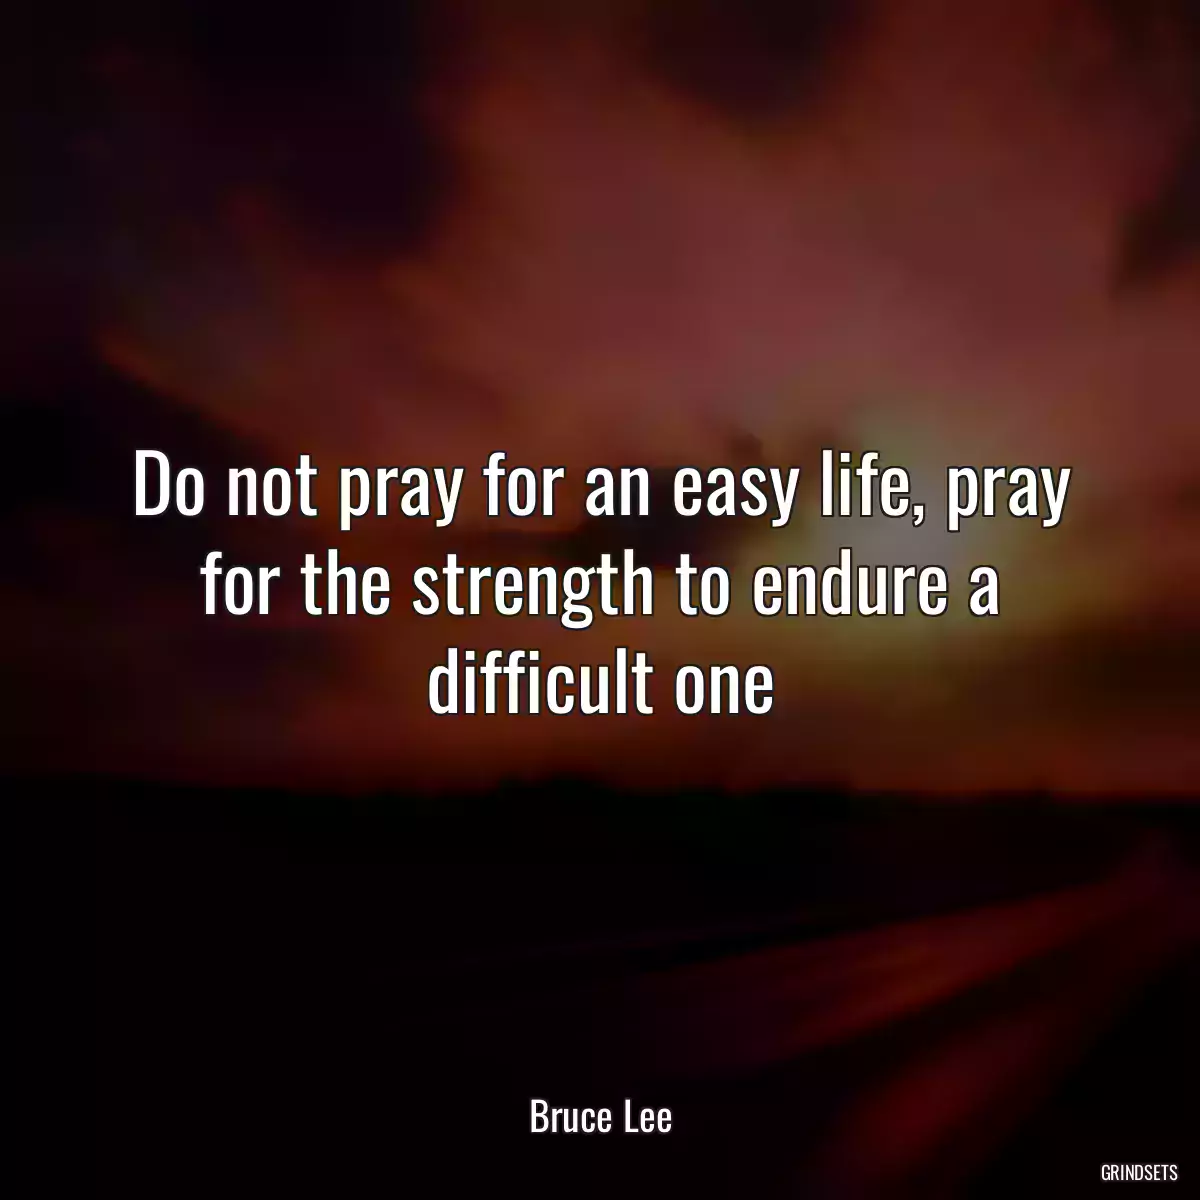 Do not pray for an easy life, pray for the strength to endure a difficult one